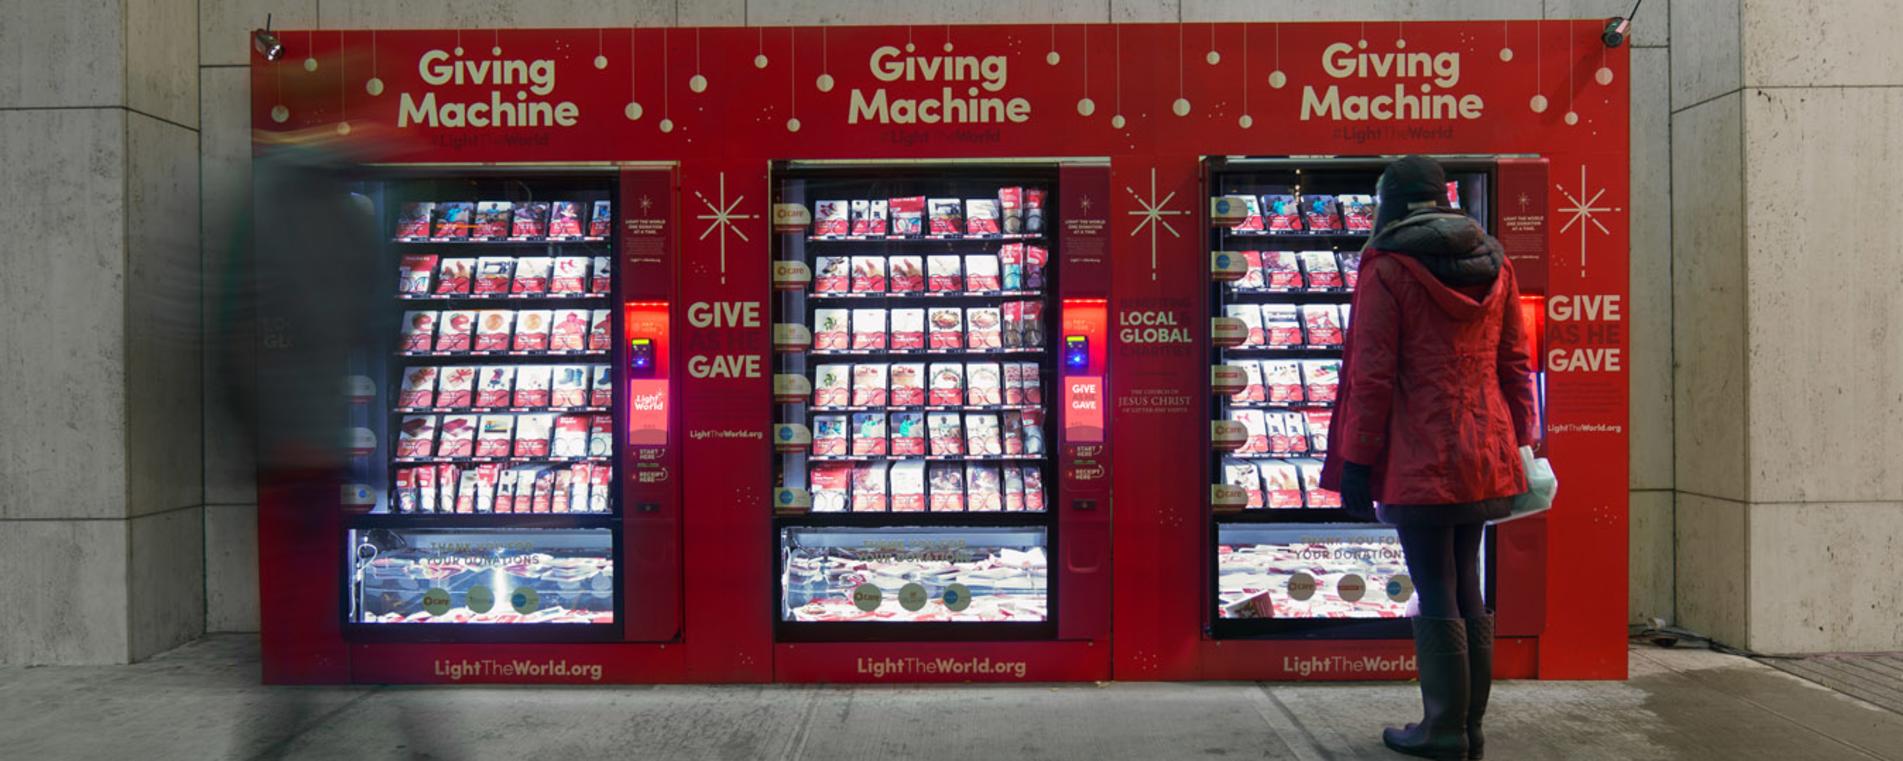 Giving Machines NYC